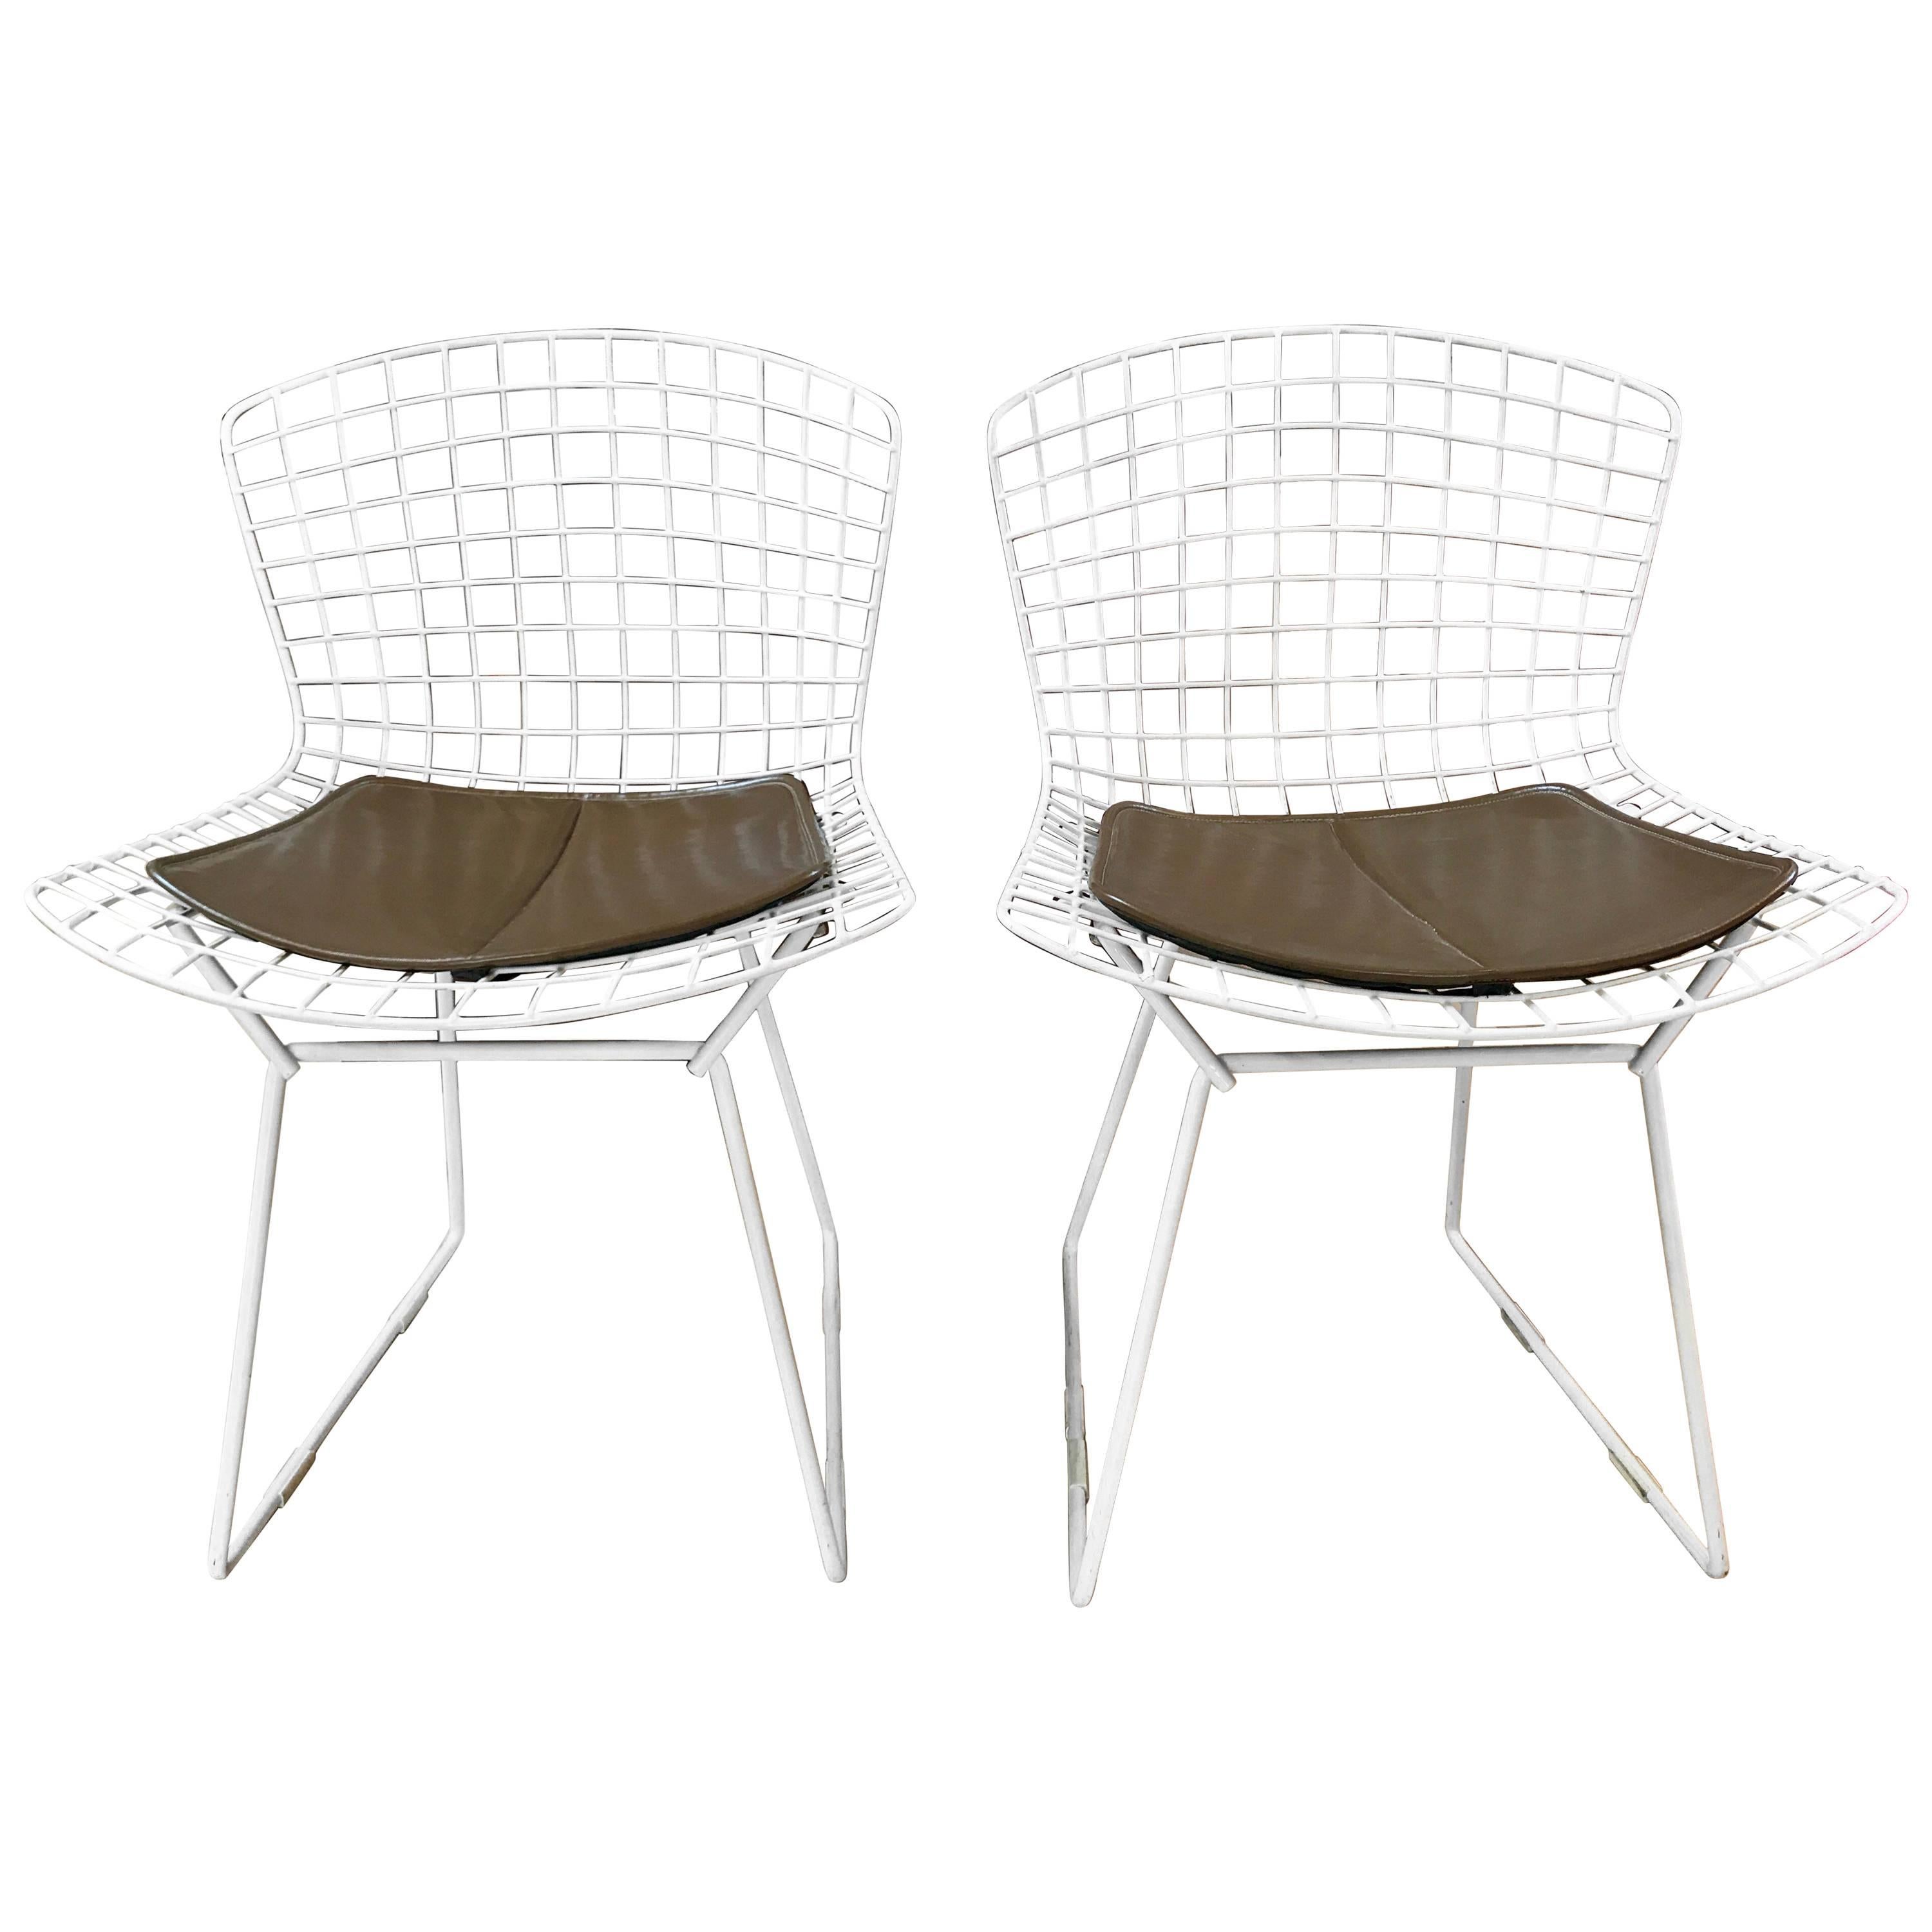 Pair of 1971 Harry Bertoia Side Chairs for Knoll with Original Seat Pads